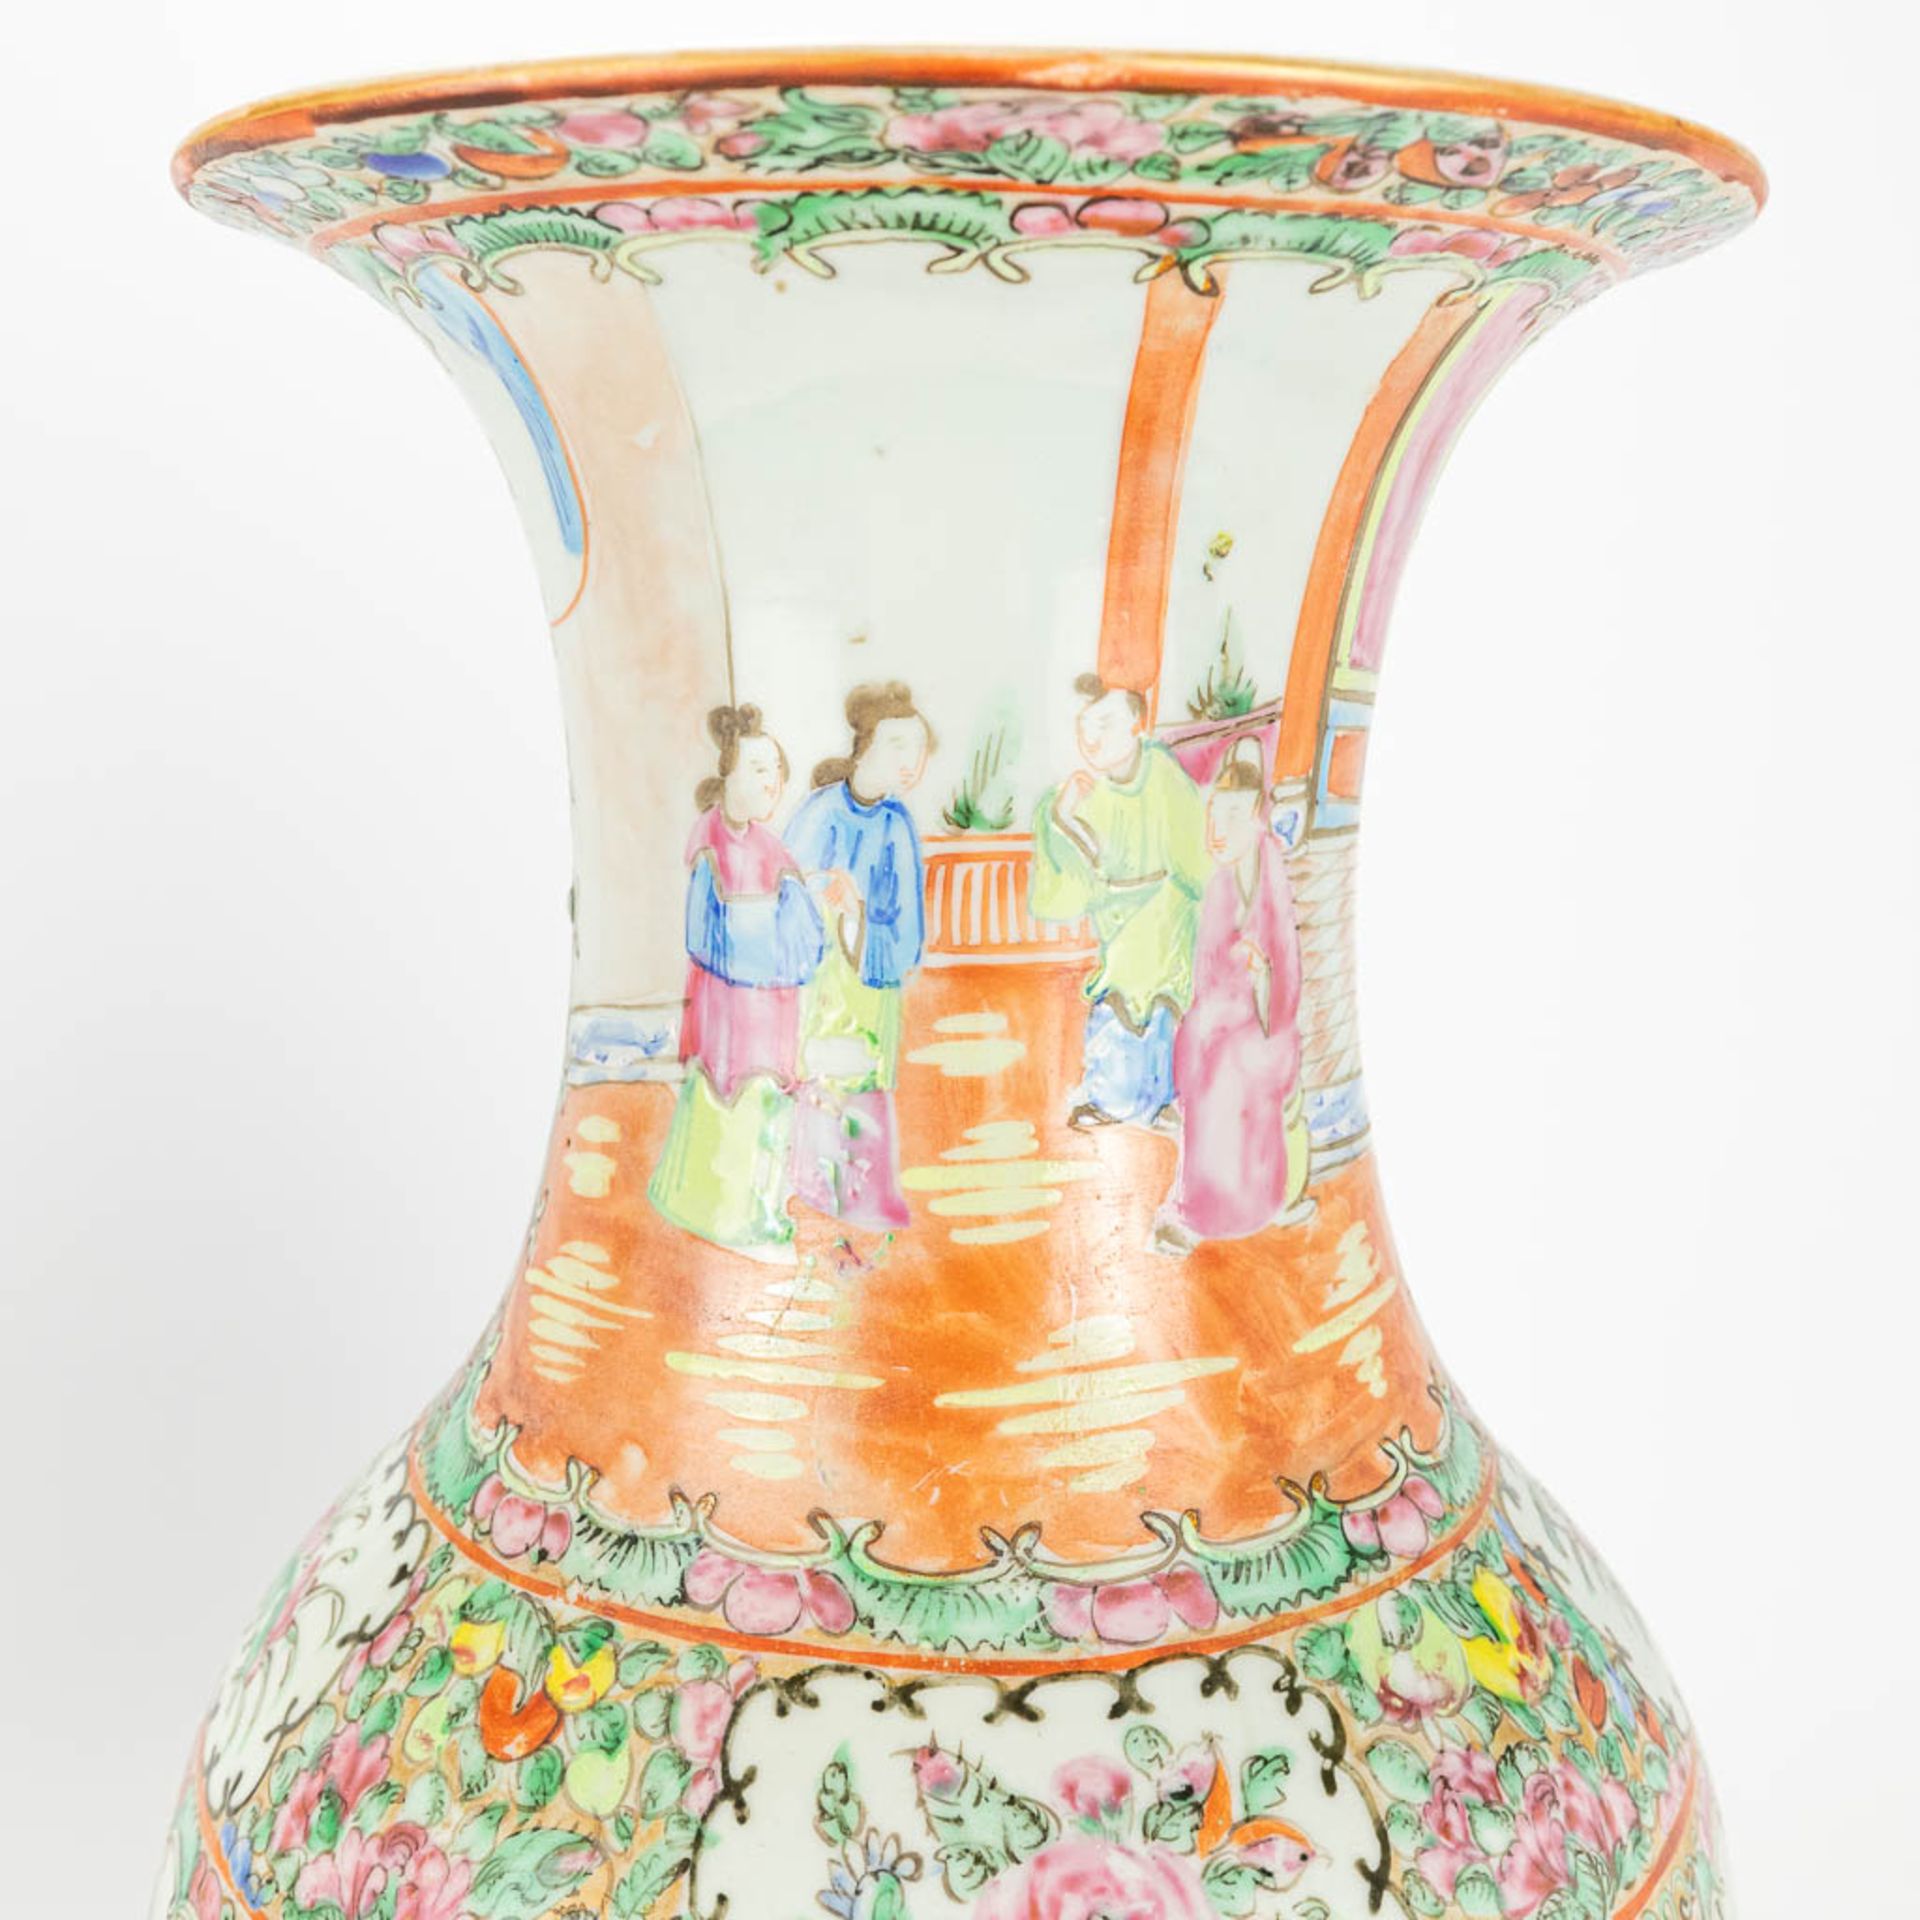 A pair of vases made of Chinese porcelain in Canton style. 19th century. - Image 5 of 17